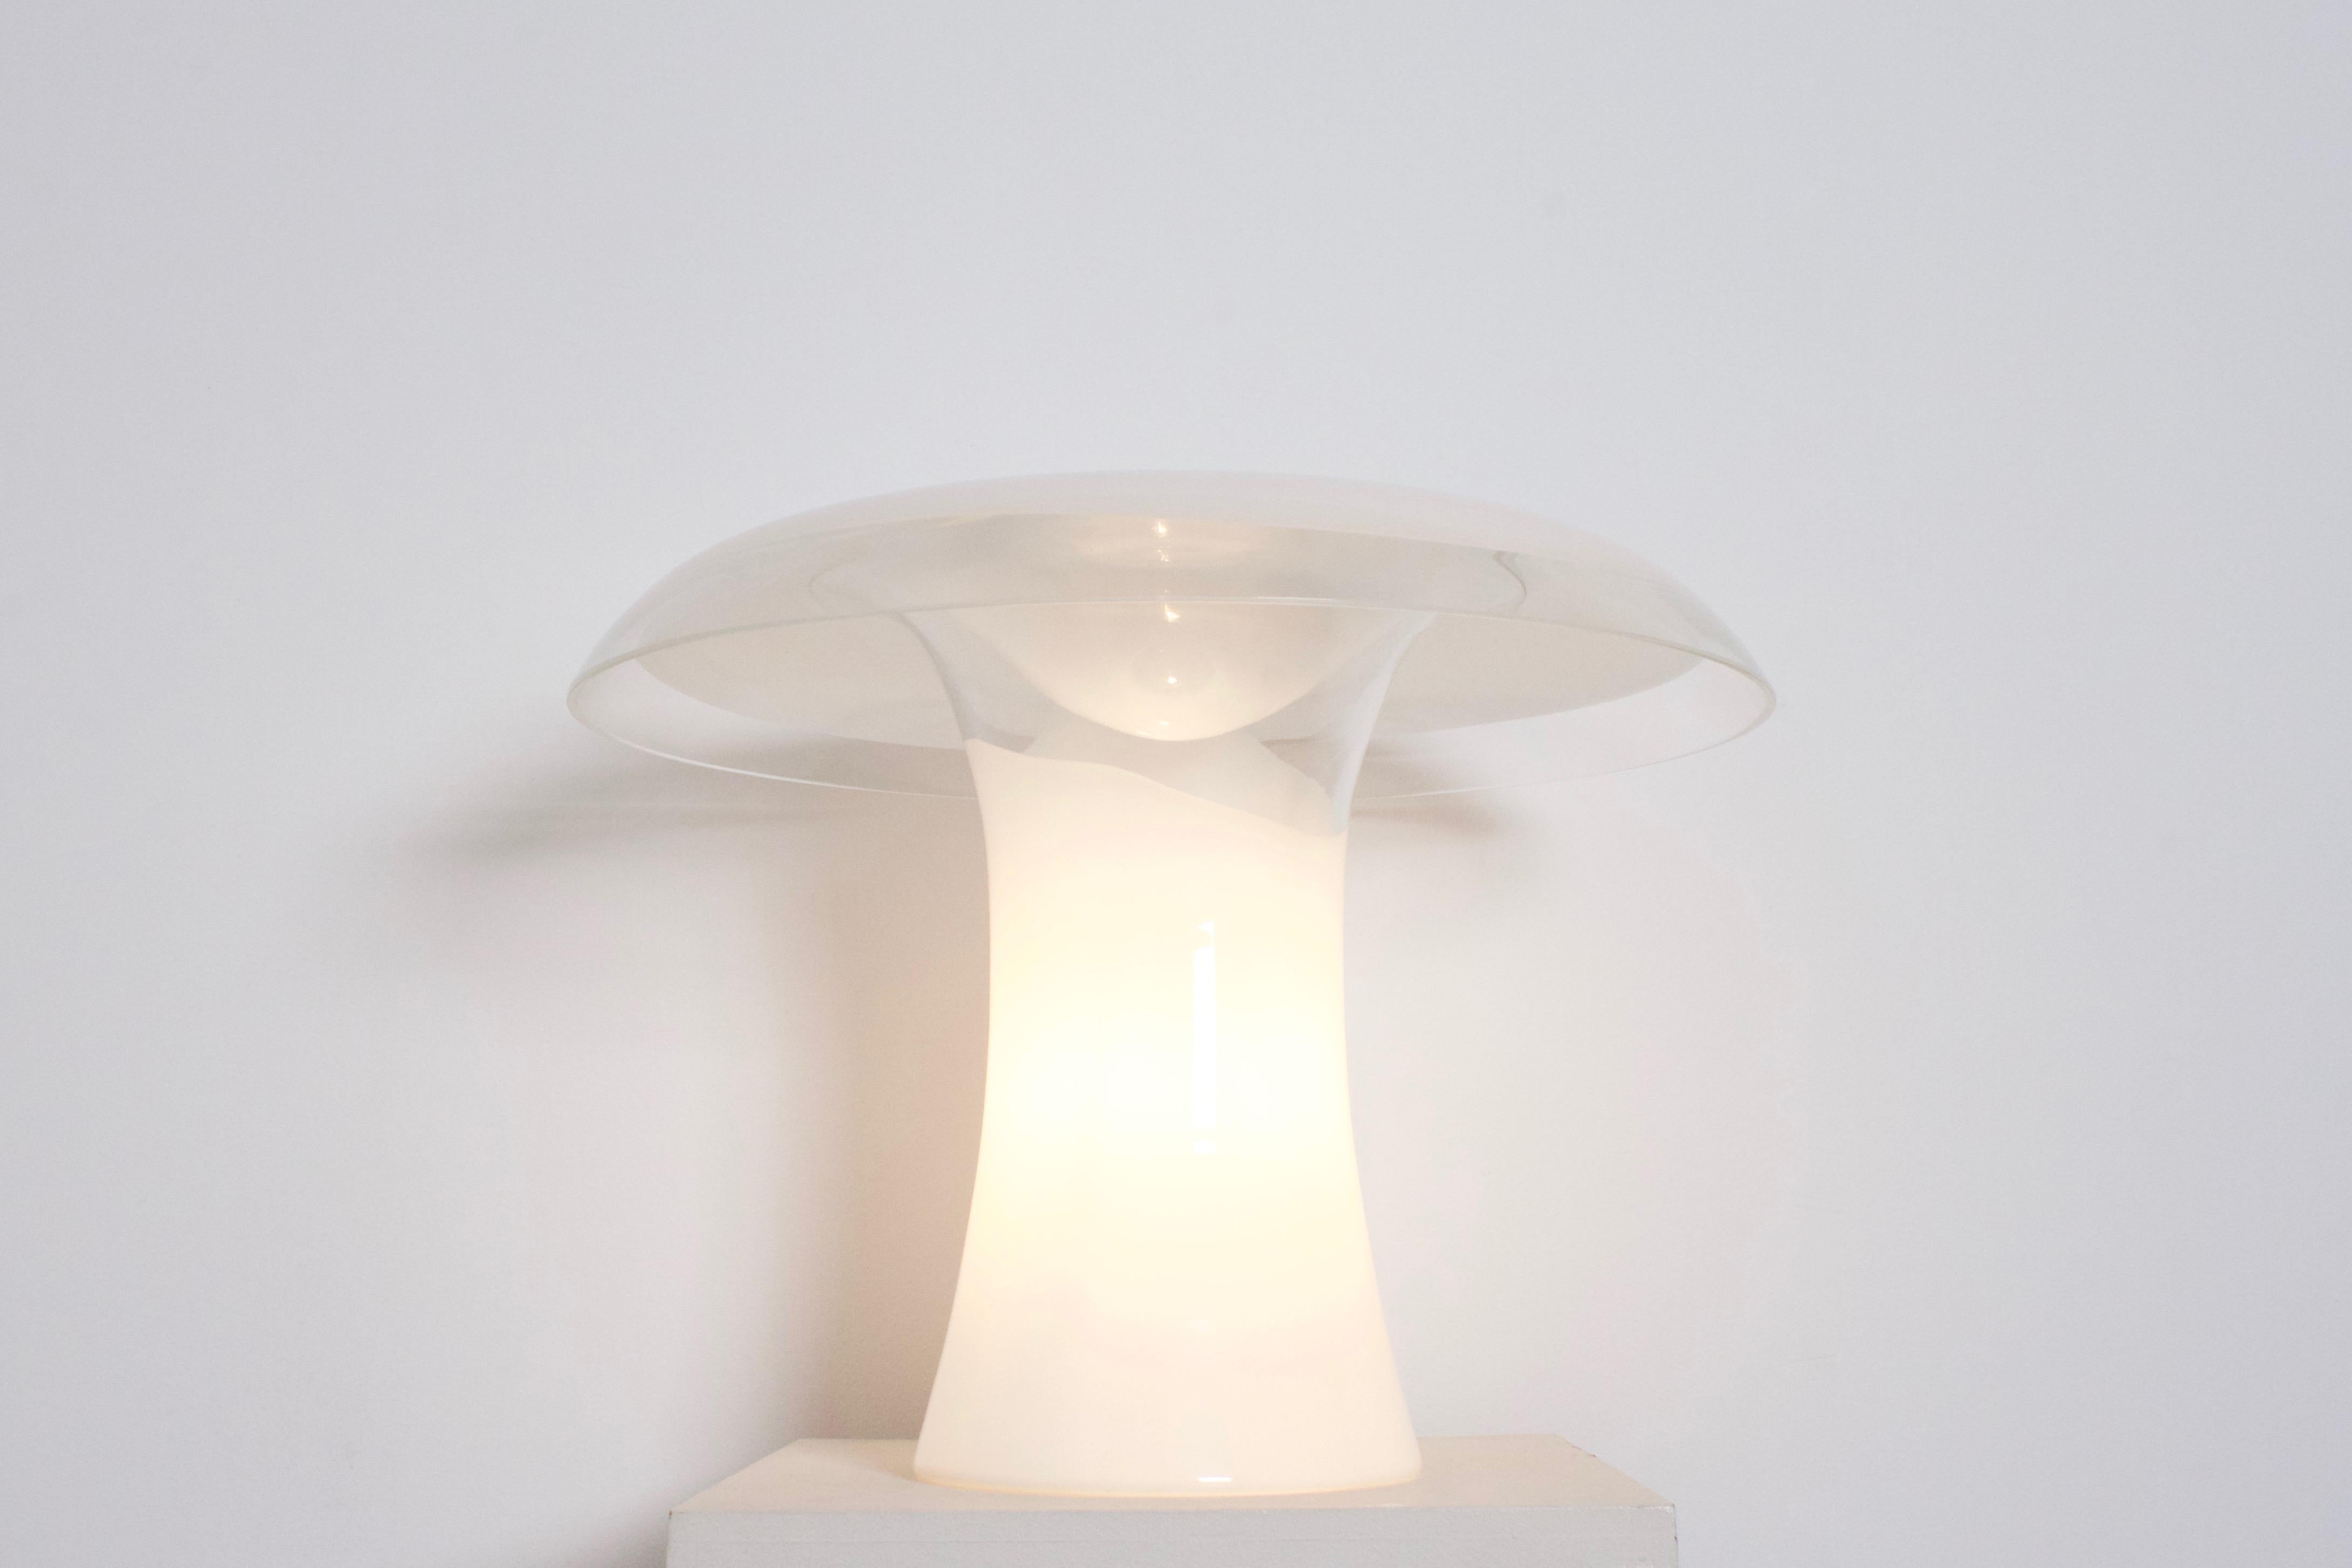 Handblown Murano glass mushroom table lamp in excellent condition.

The lamp consists of separate top- and bottom. Both are made of handblown sculptural glass with a gradient of white to clear glass.

Takes a single standard-base bulb, 40 watts